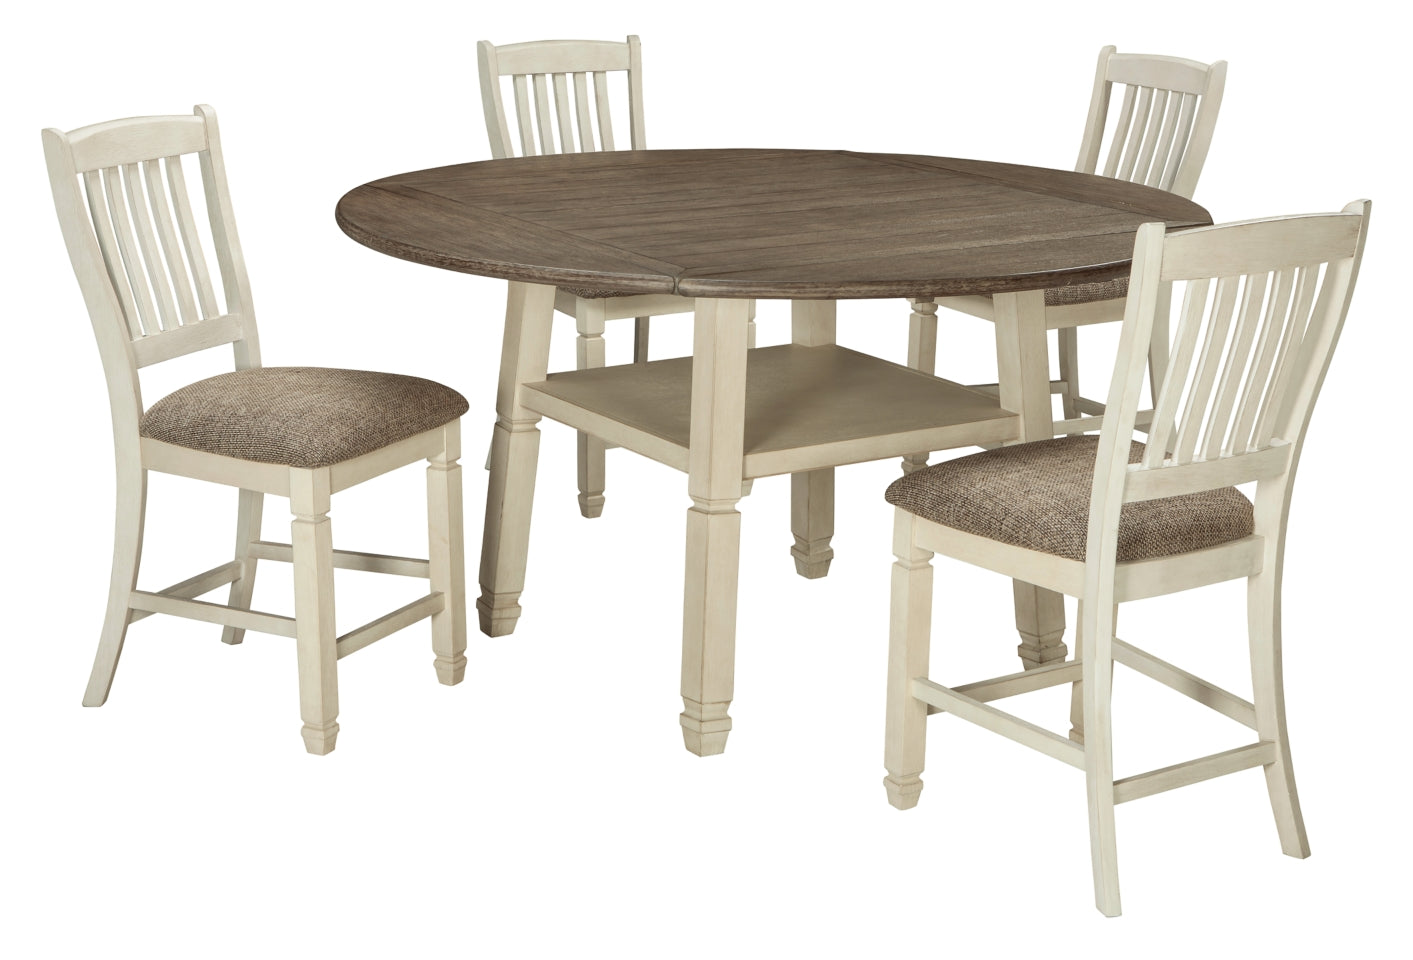 Bolanburg Counter Height Dining Table and 4 Barstools - PKG000402 - furniture place usa